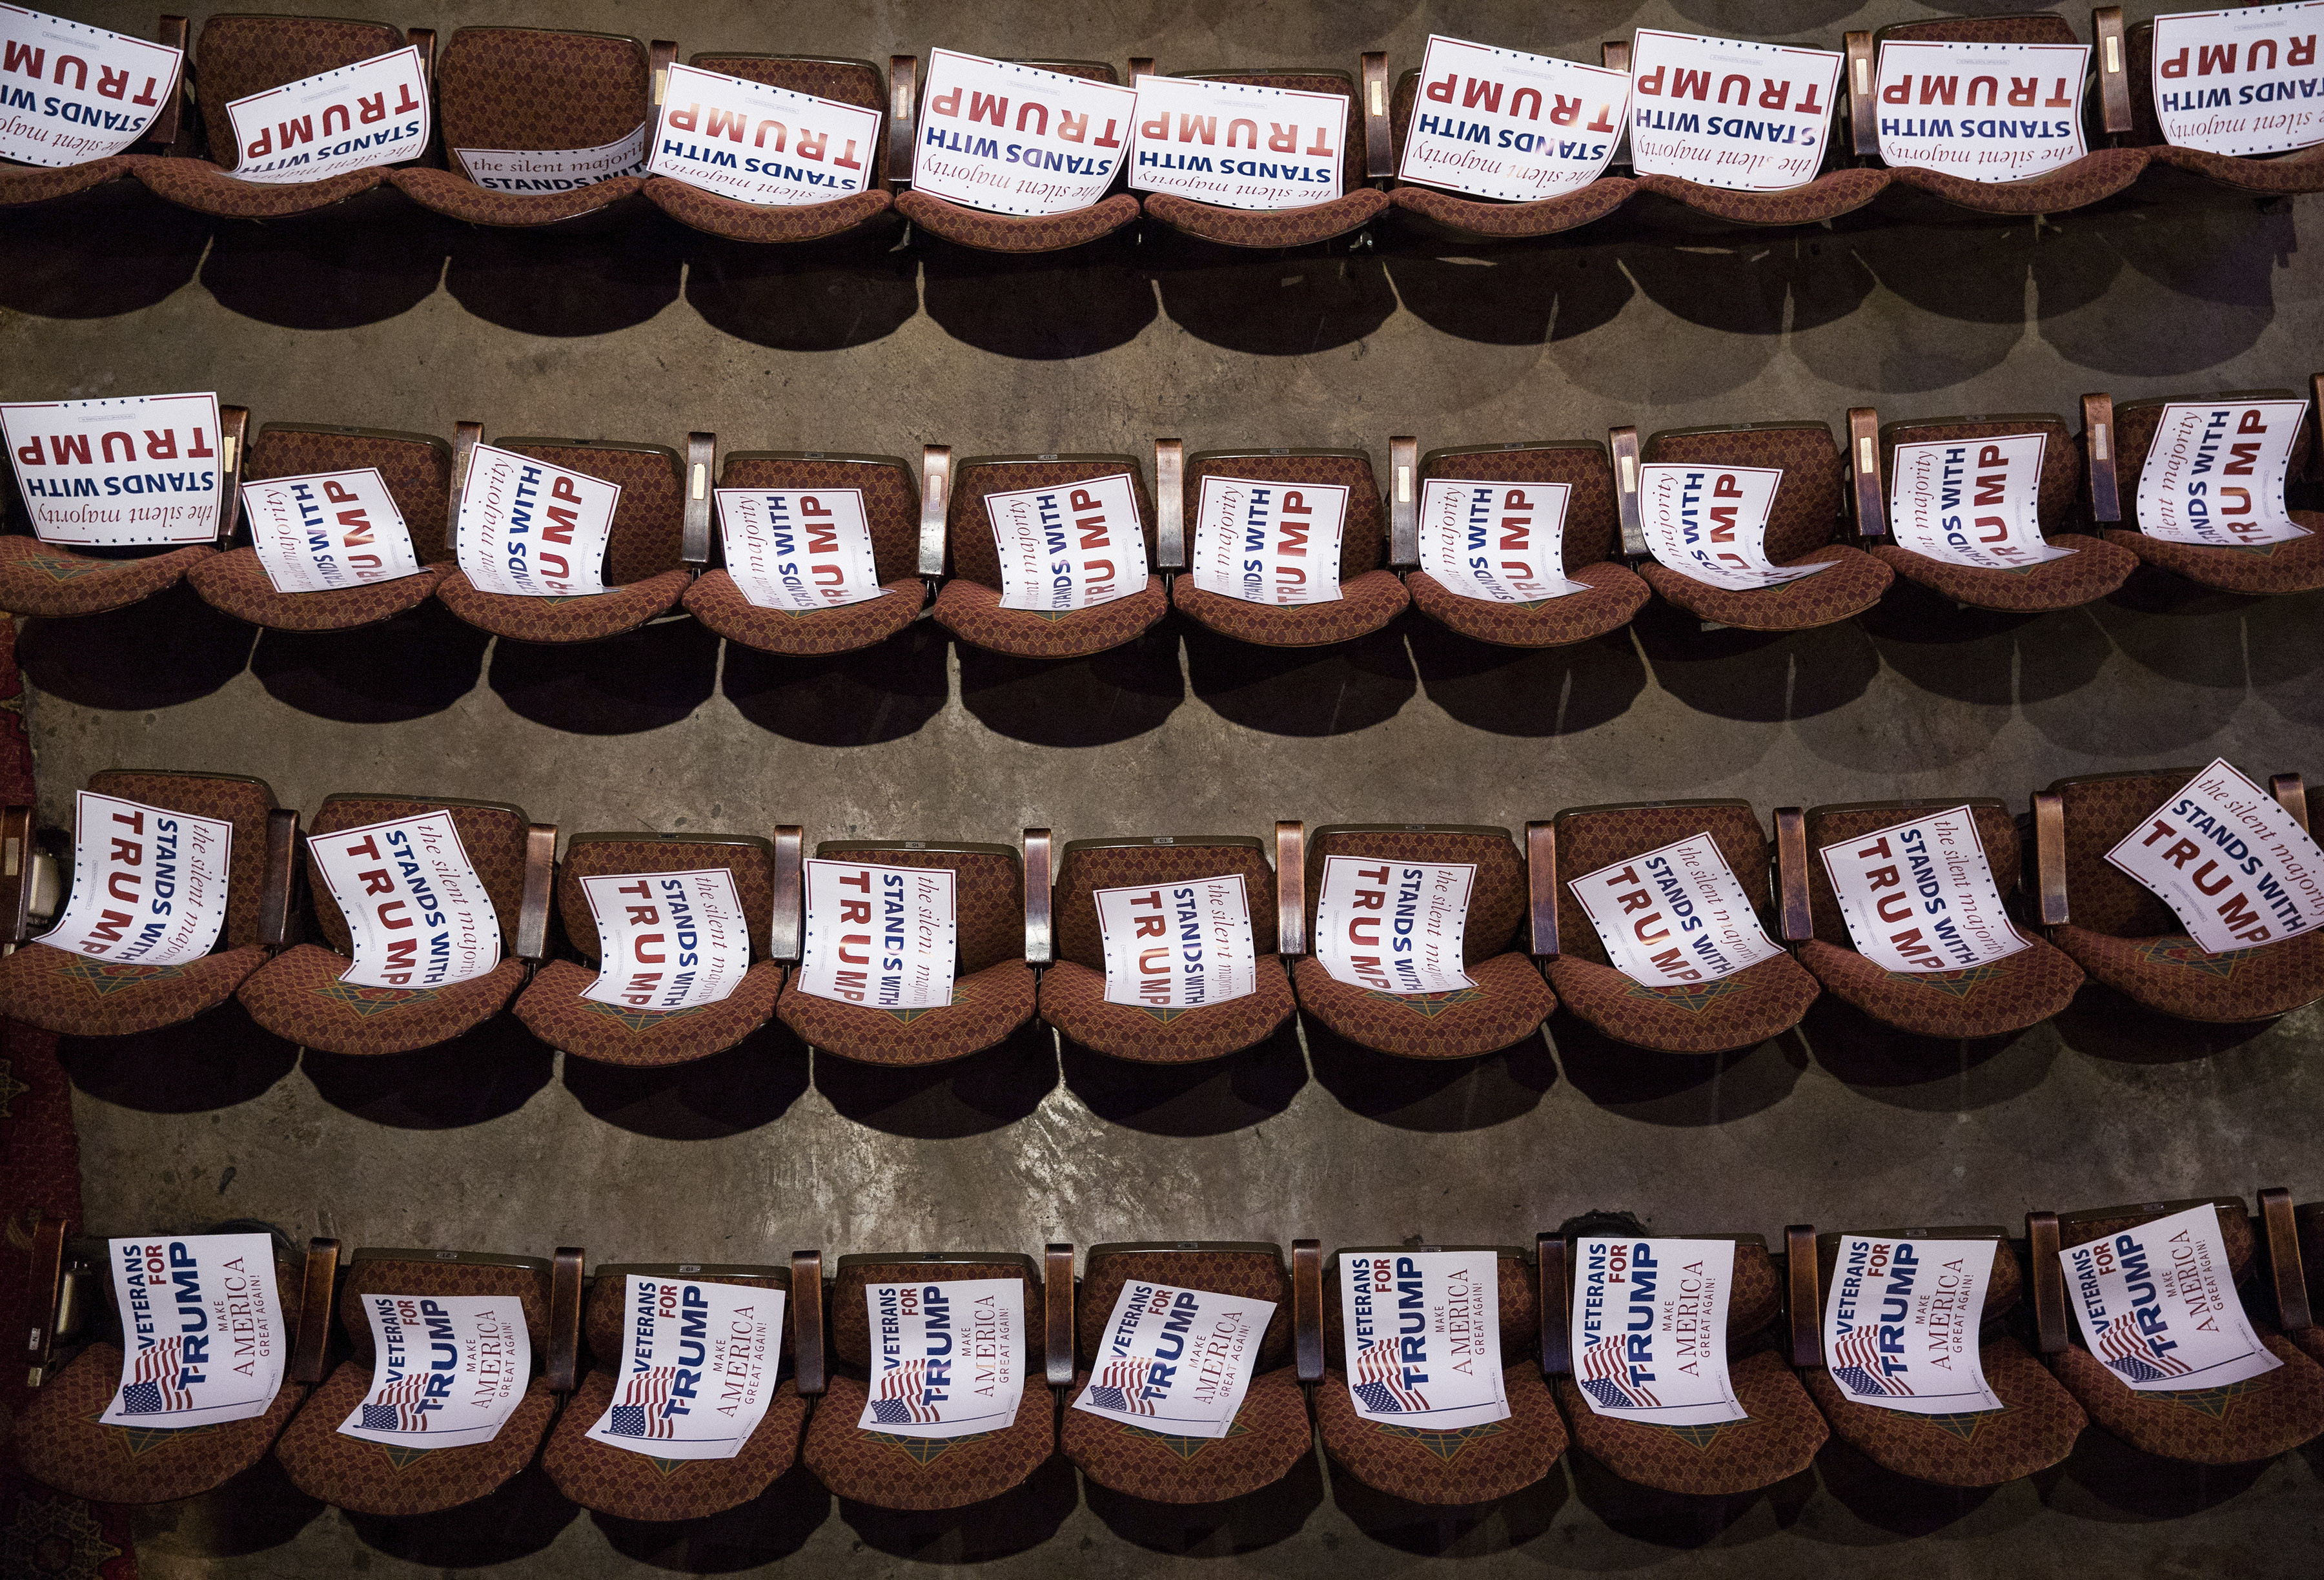 Campaign signs left on the seats before Donald Trump's campaign rally at the Fox Theatre in Atlanta, on June 15, 2016.